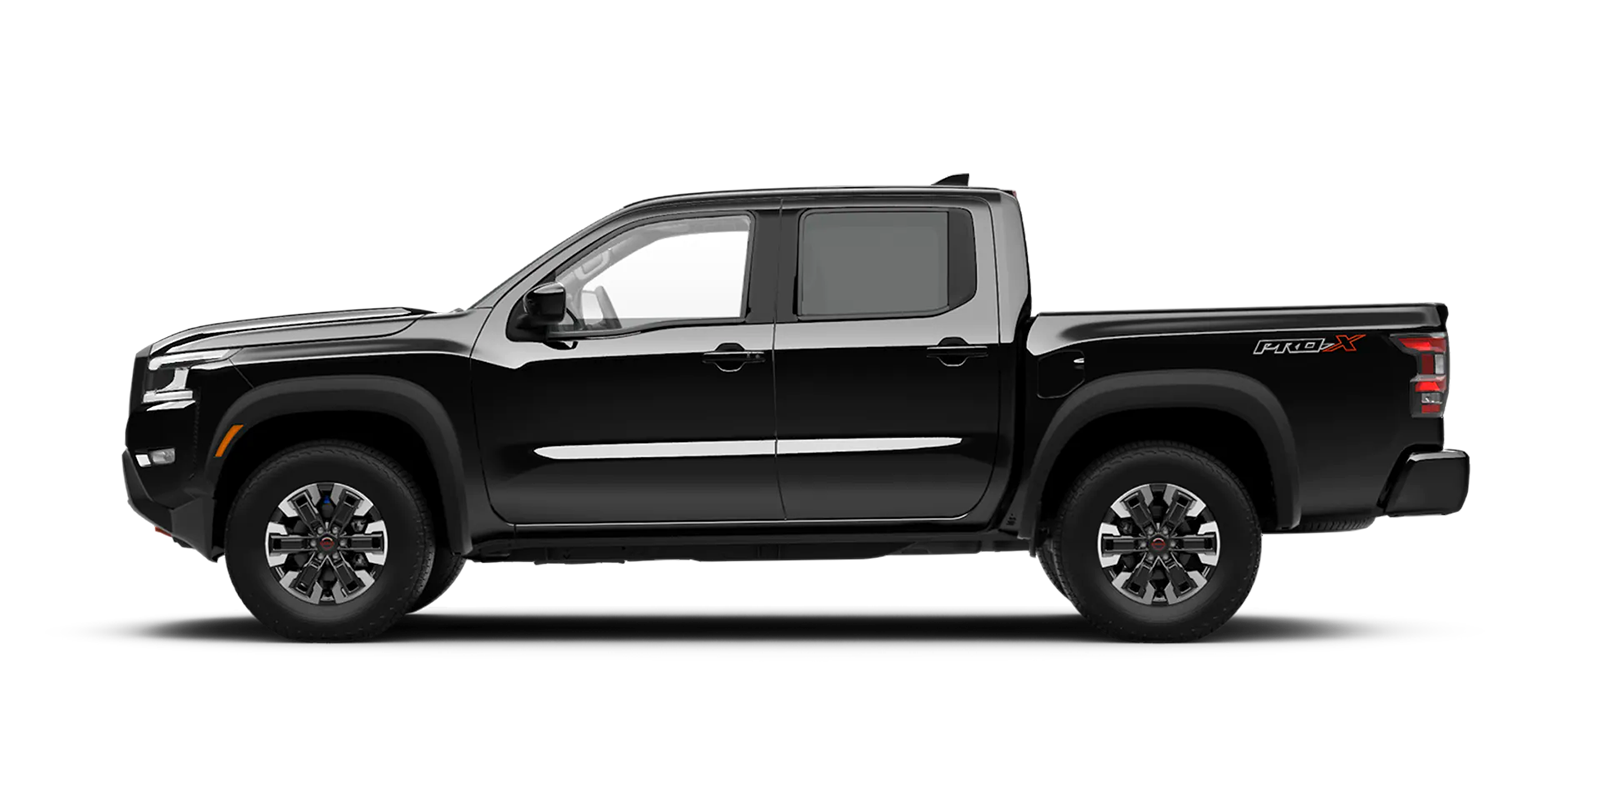 2022 Frontier Crew Cab Pro-X 4x2 in Super Black | Nationwide Nissan in Timonium MD